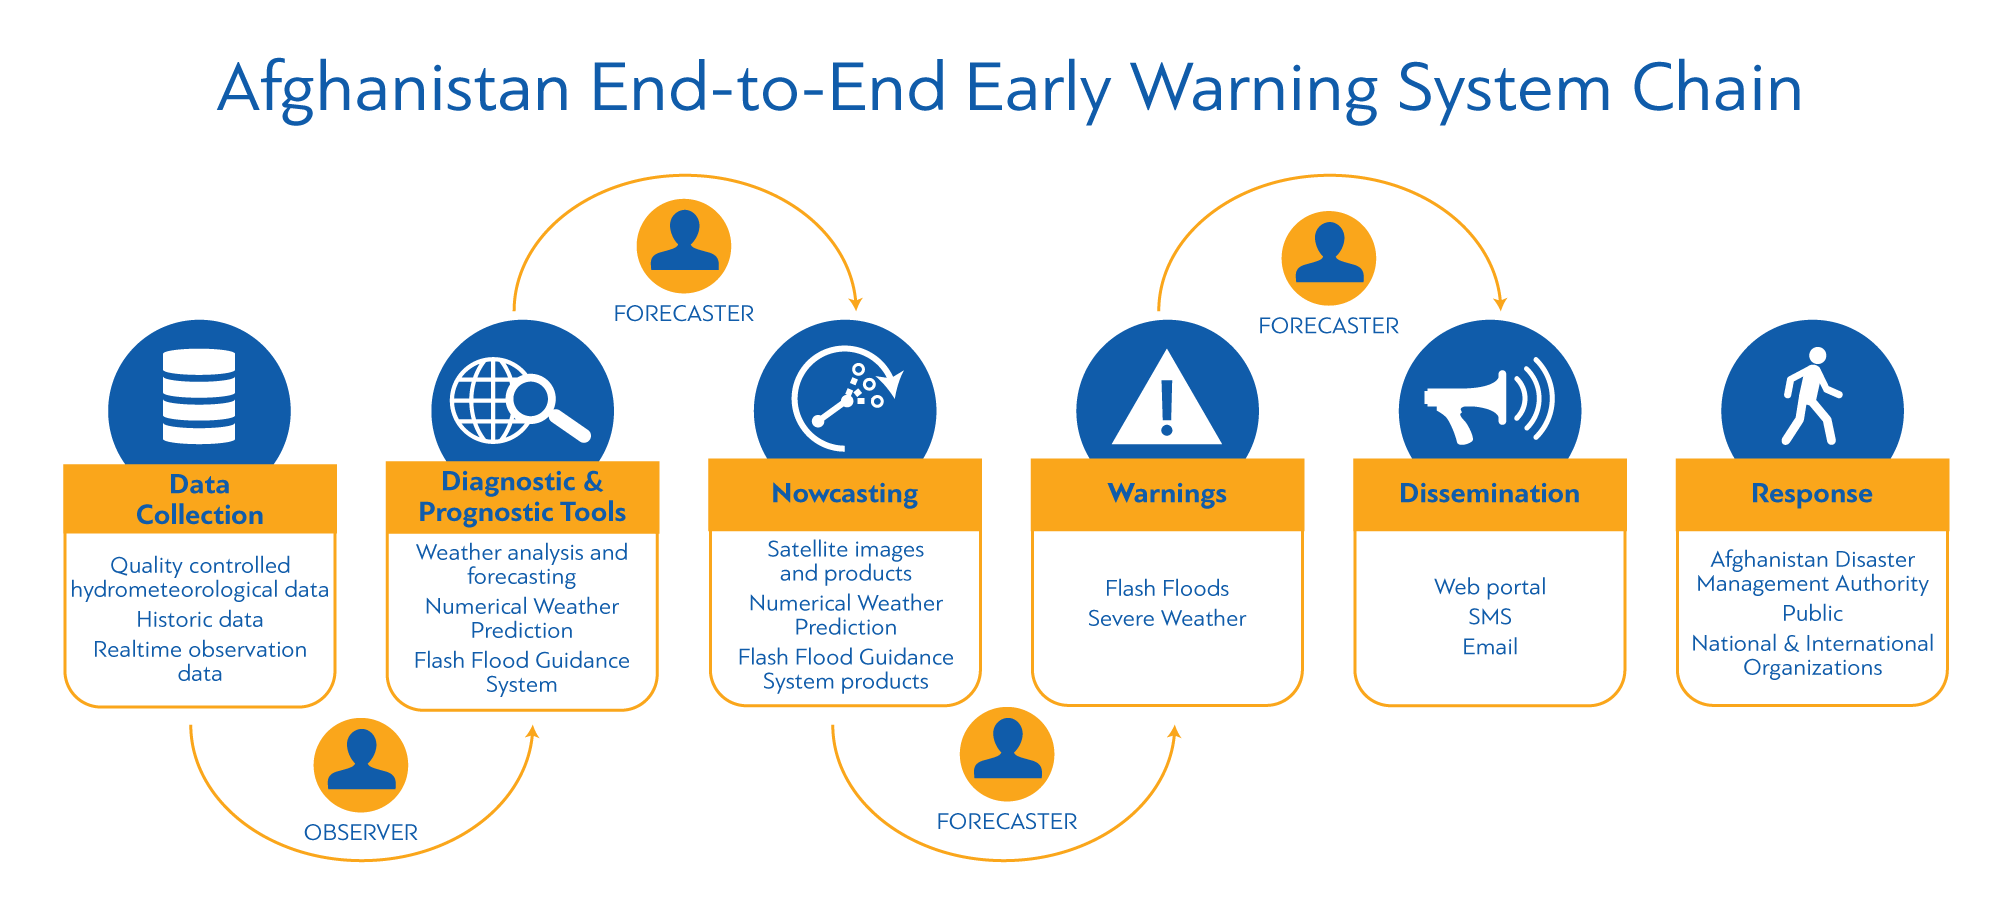 Main Components of the Afghanistan End-to-End Early Warning System Chain